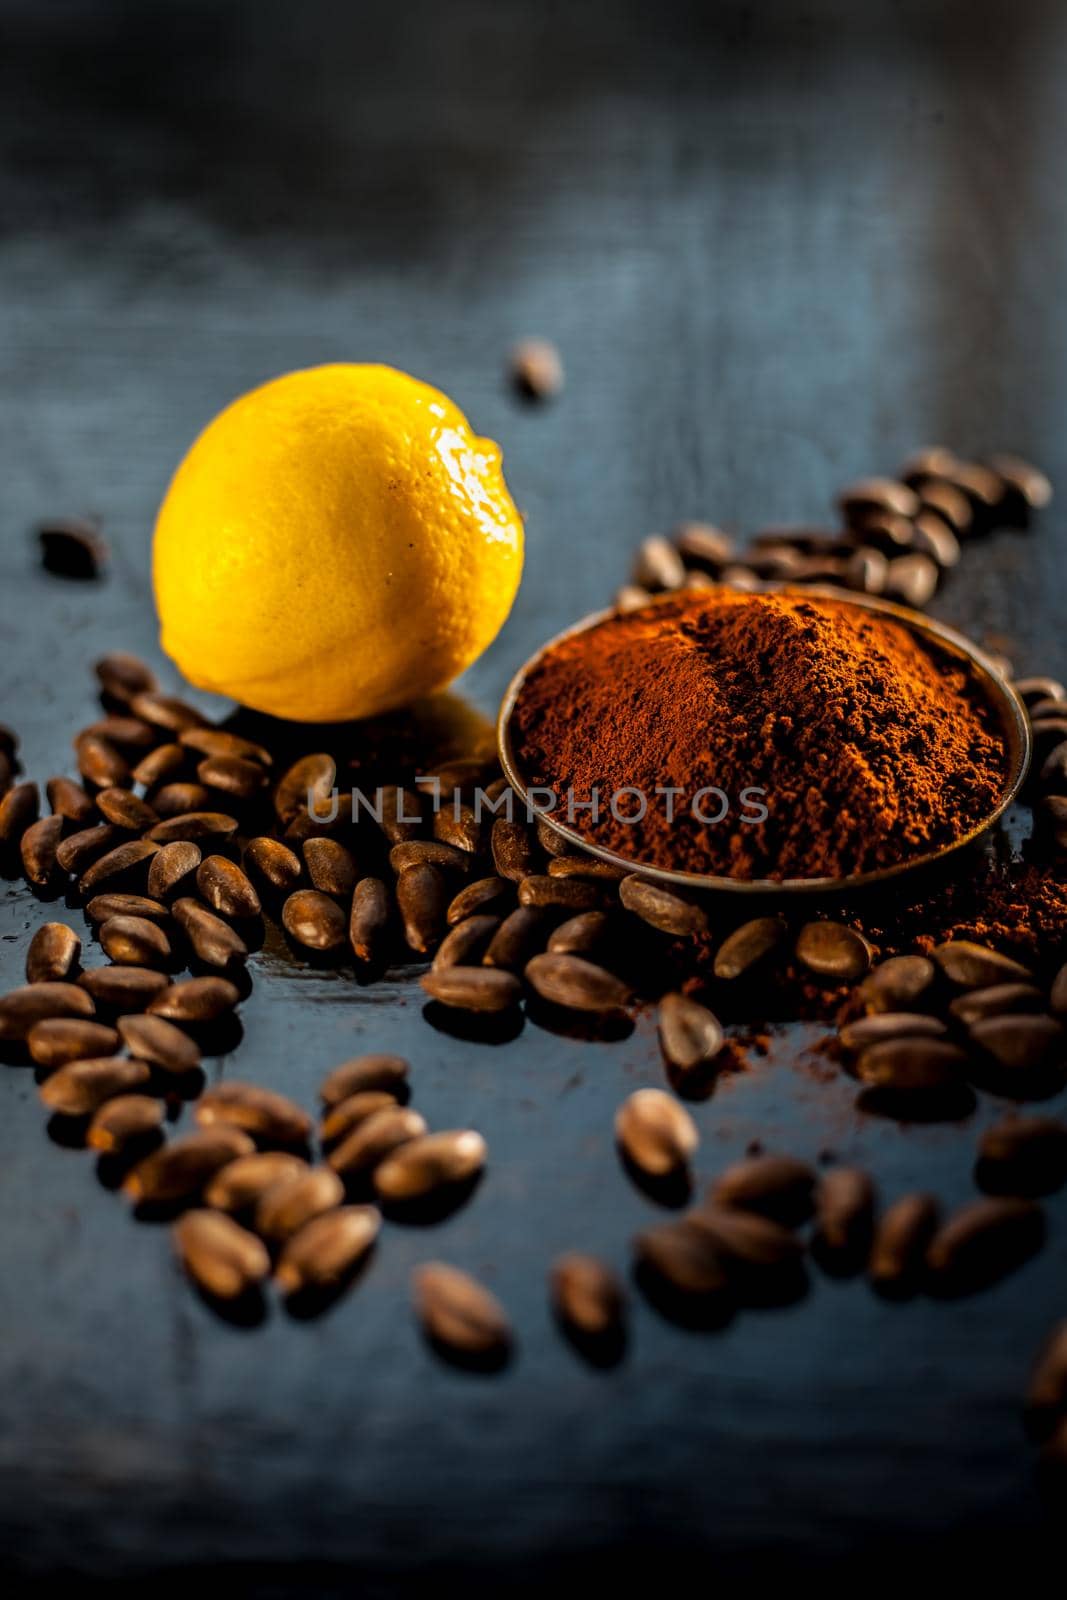 Best home remedy or face mask to remove tan at home consisting of some coffee beans powder and lemon juice on a black colored wooden surface. by mirzamlk